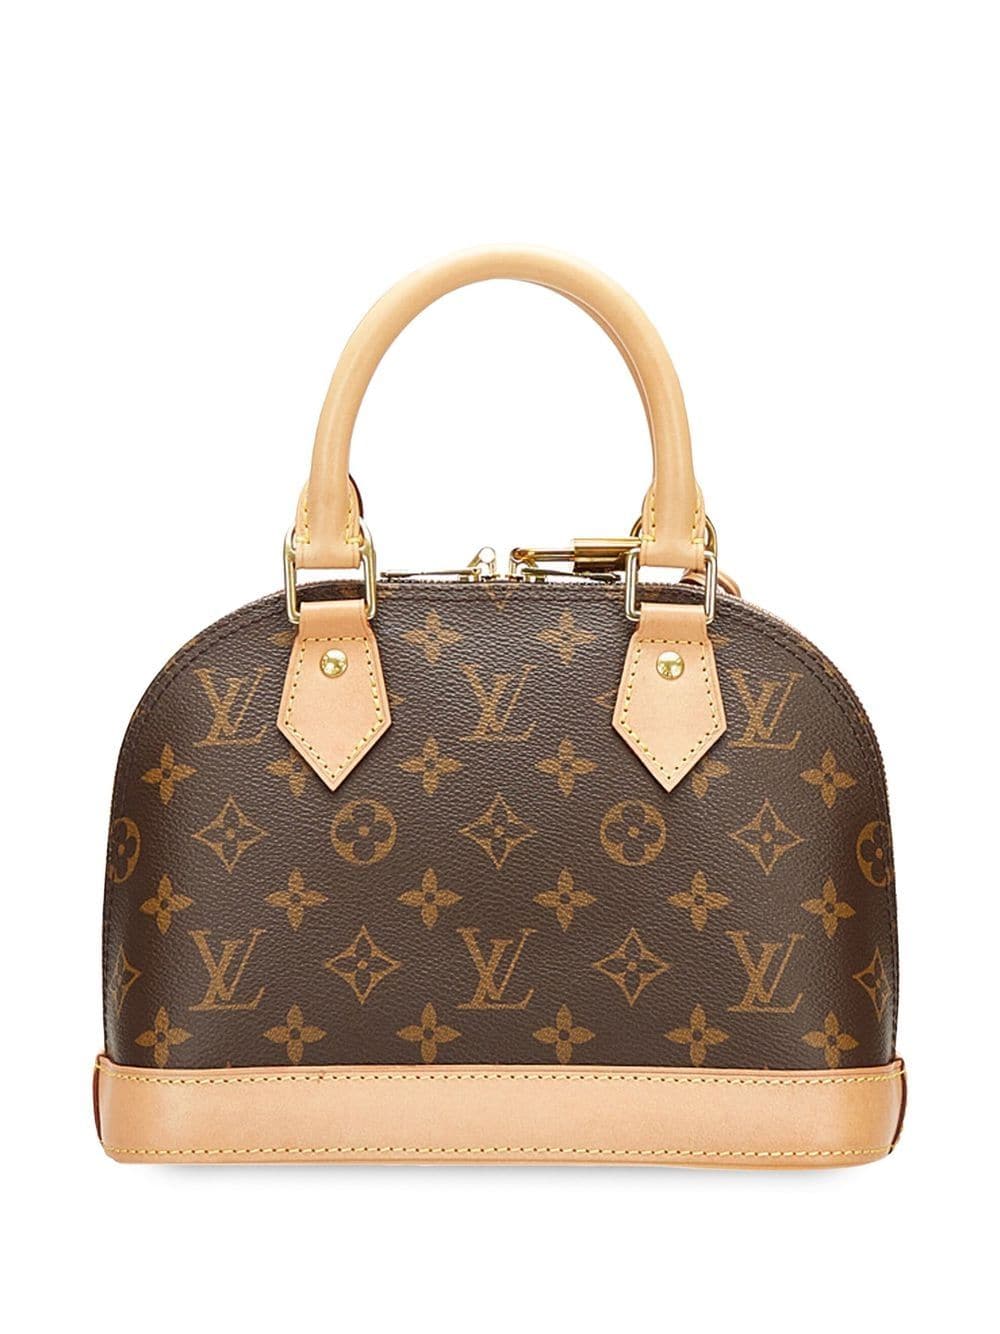 Louis Vuitton Extra Large Bags  Handbags for Women  Authenticity  Guaranteed  eBay